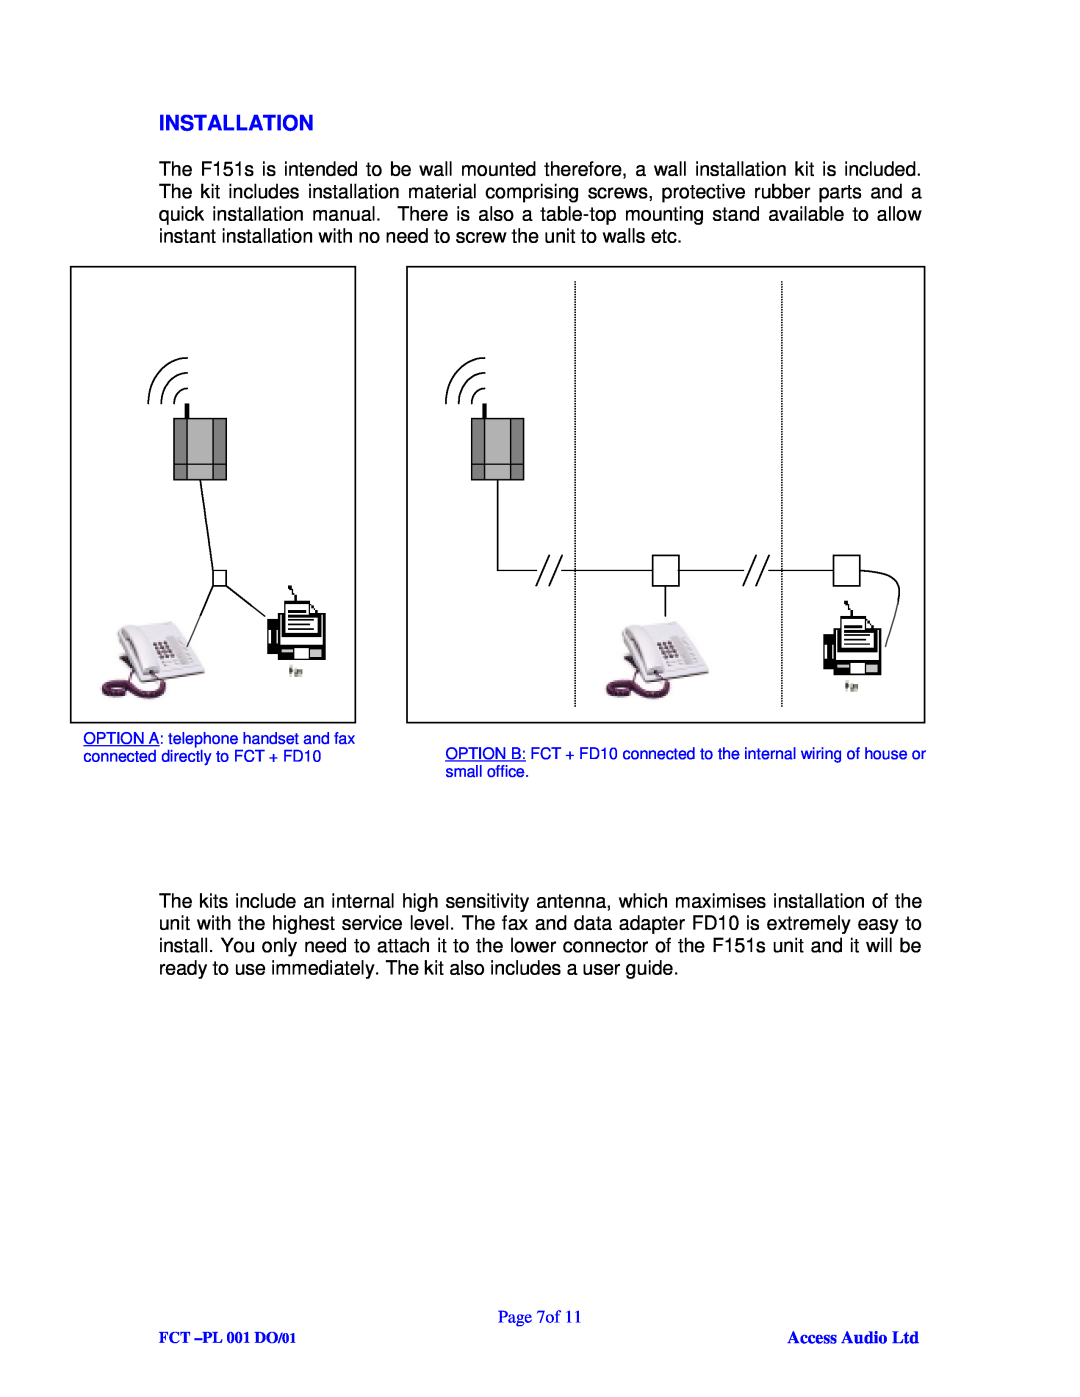 AOC none manual Installation, Page 7of 